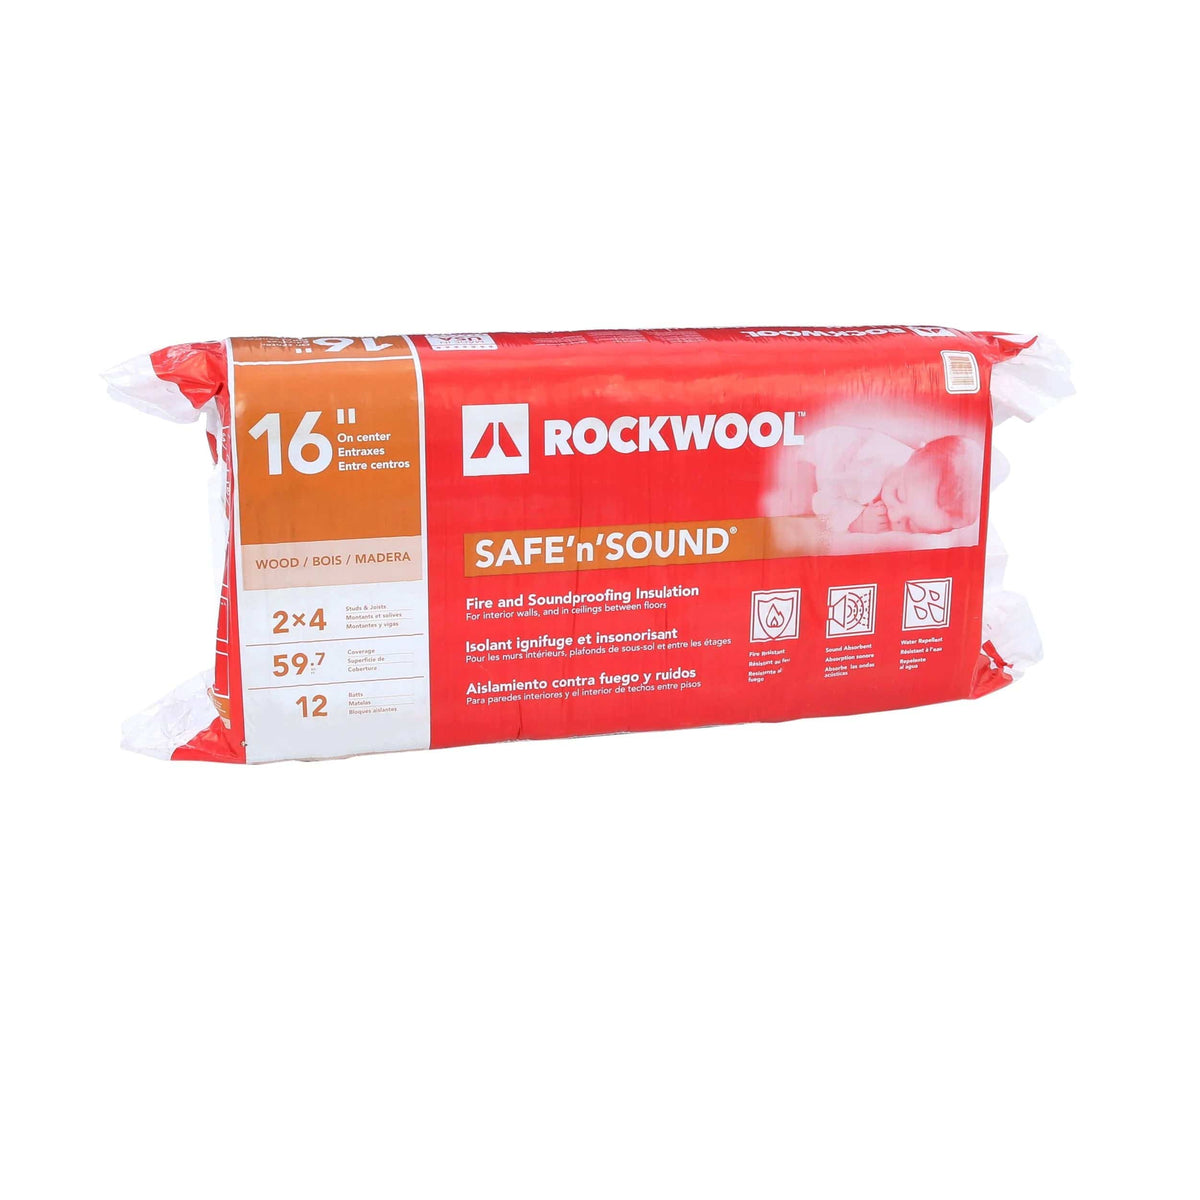 Reviews for ROCKWOOL Safe 'n' Sound 3 in. x 15-1/4 in. x 47 in.  Soundproofing and Fire Resistant Stone Wool Insulation Batt (59.7 sq. ft.)